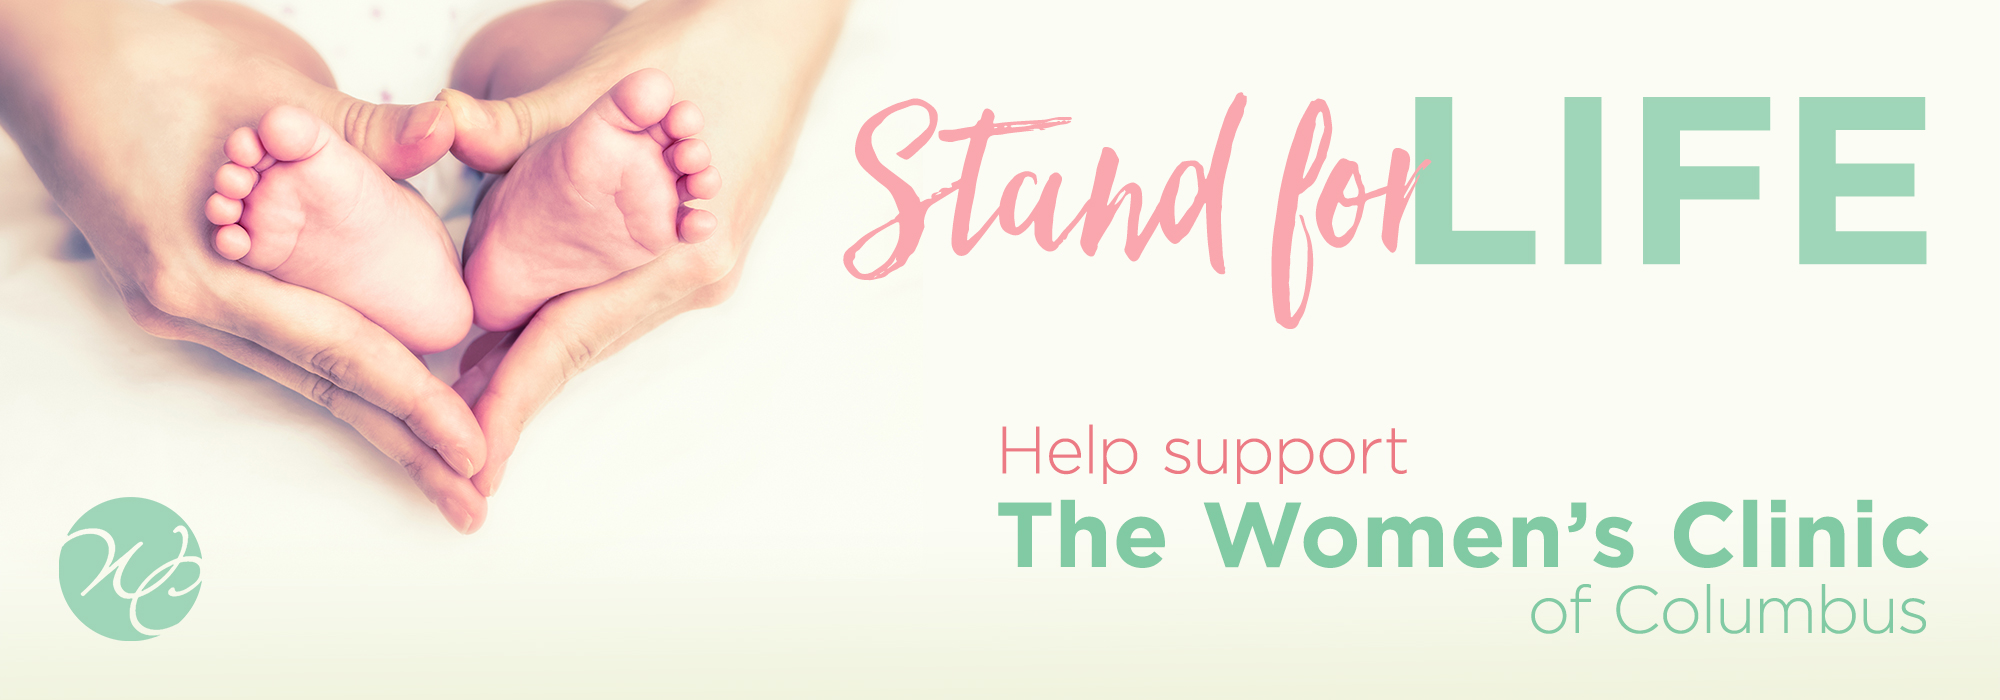 Stand For Life Help Support The Women's Clinic of Columbus columbustwc.com 614-237-2000